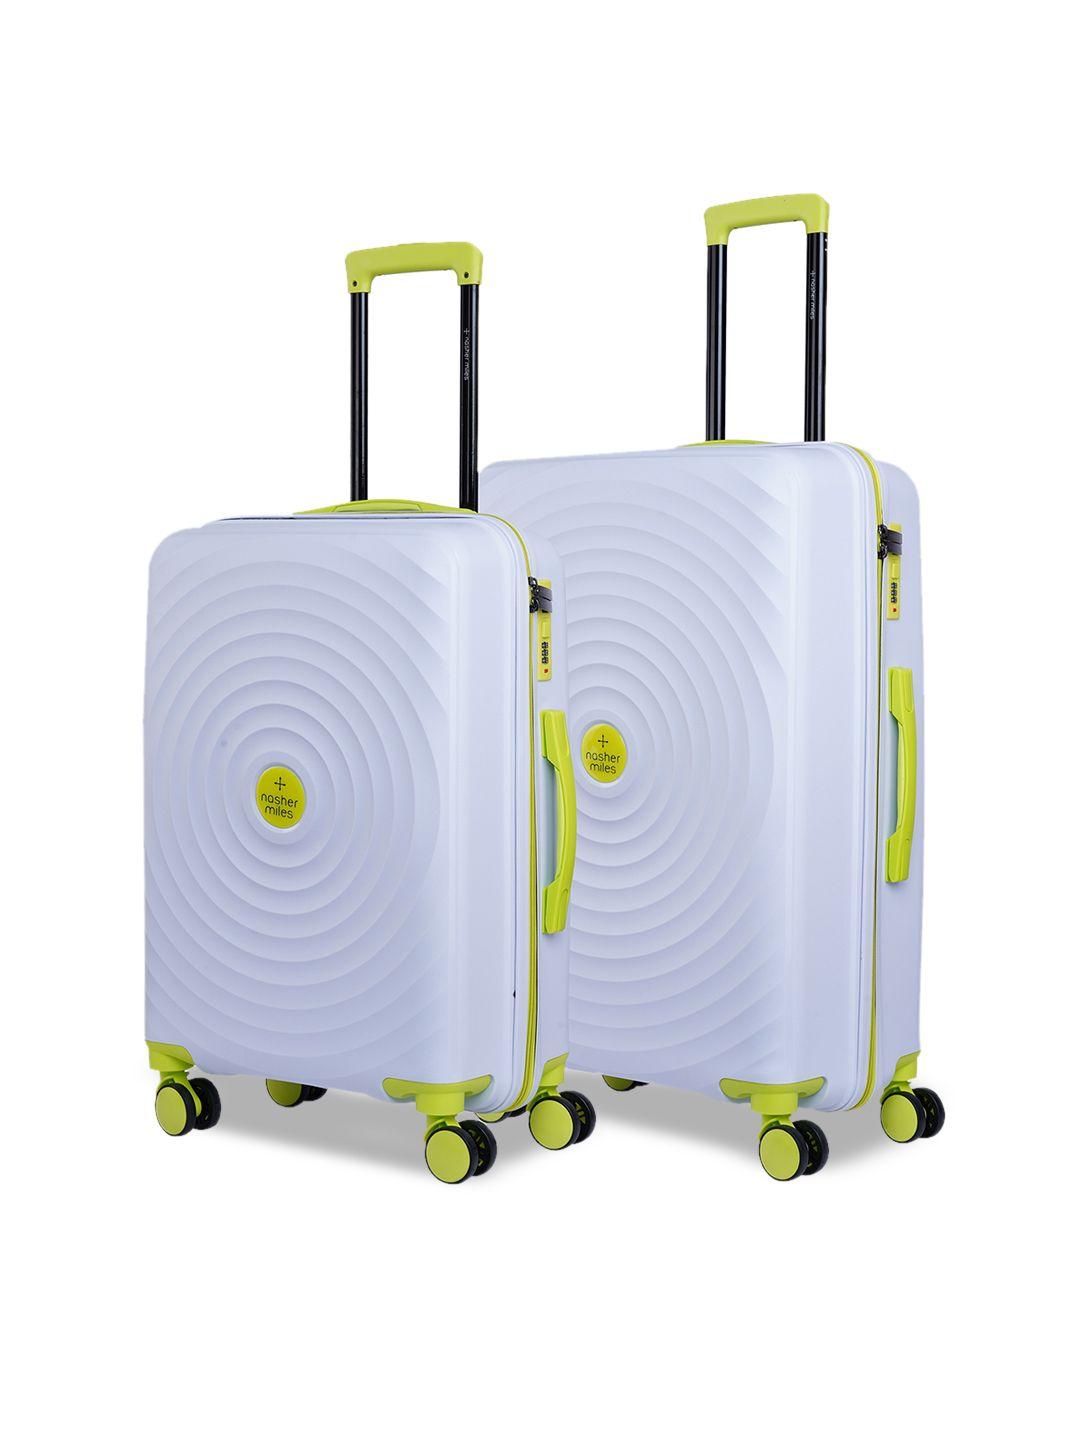 nasher miles set of 2 lavender & fluorescent green textured hard-sided trolley bags